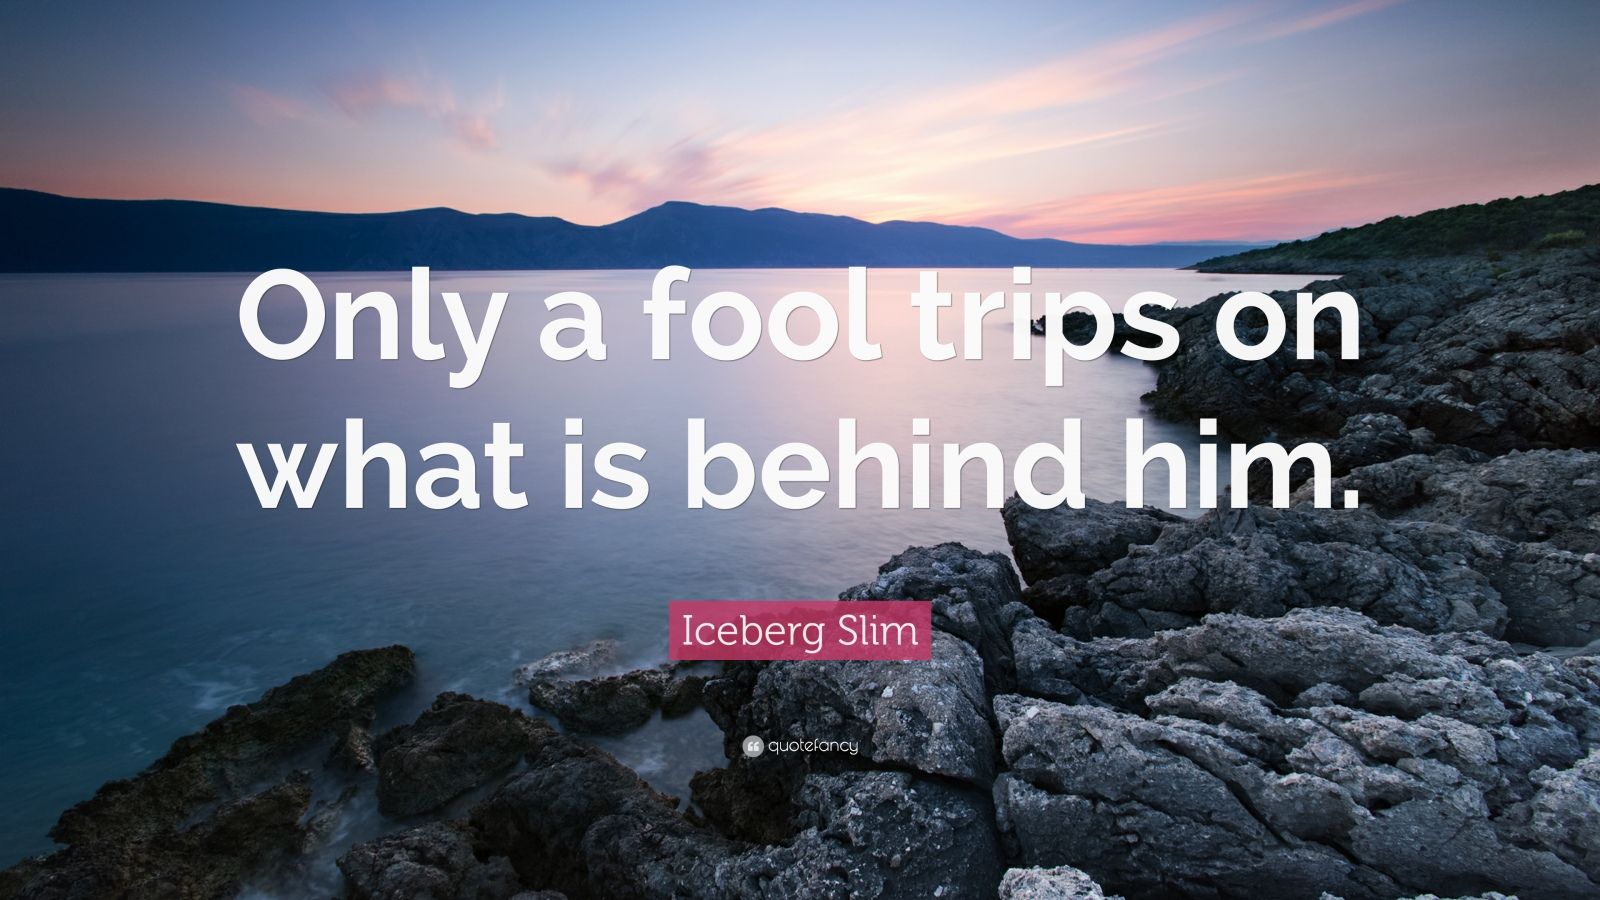 Iceberg Slim Quote: “Only a fool trips on what is behind him.” (7